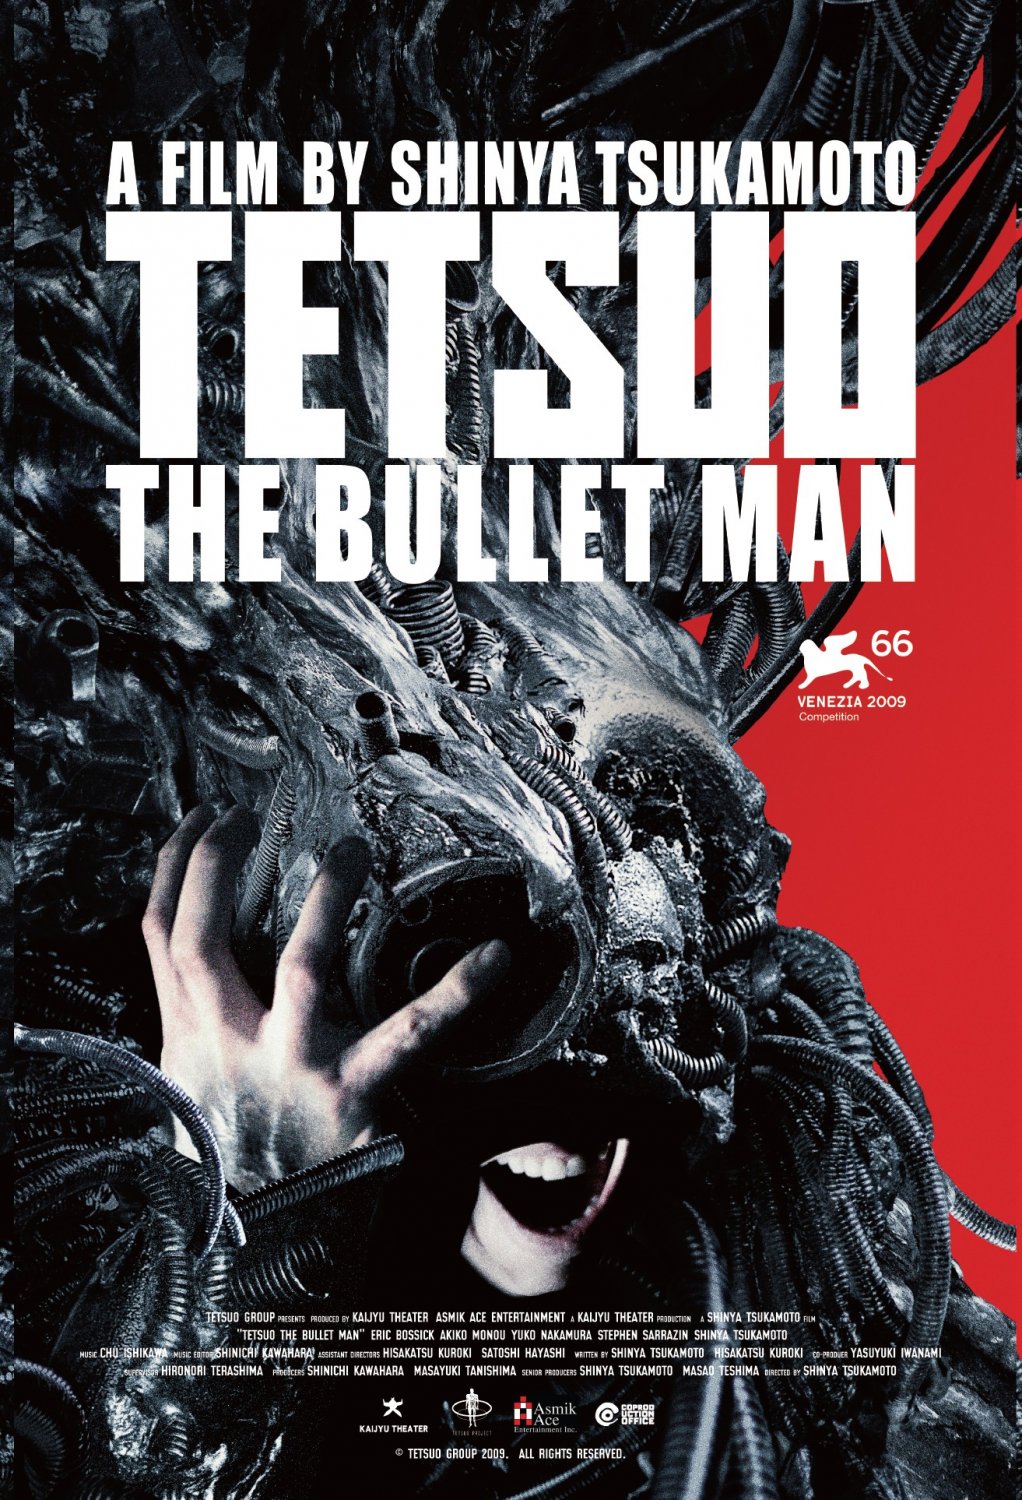 Extra Large Movie Poster Image for Tetsuo: The Bullet Man 